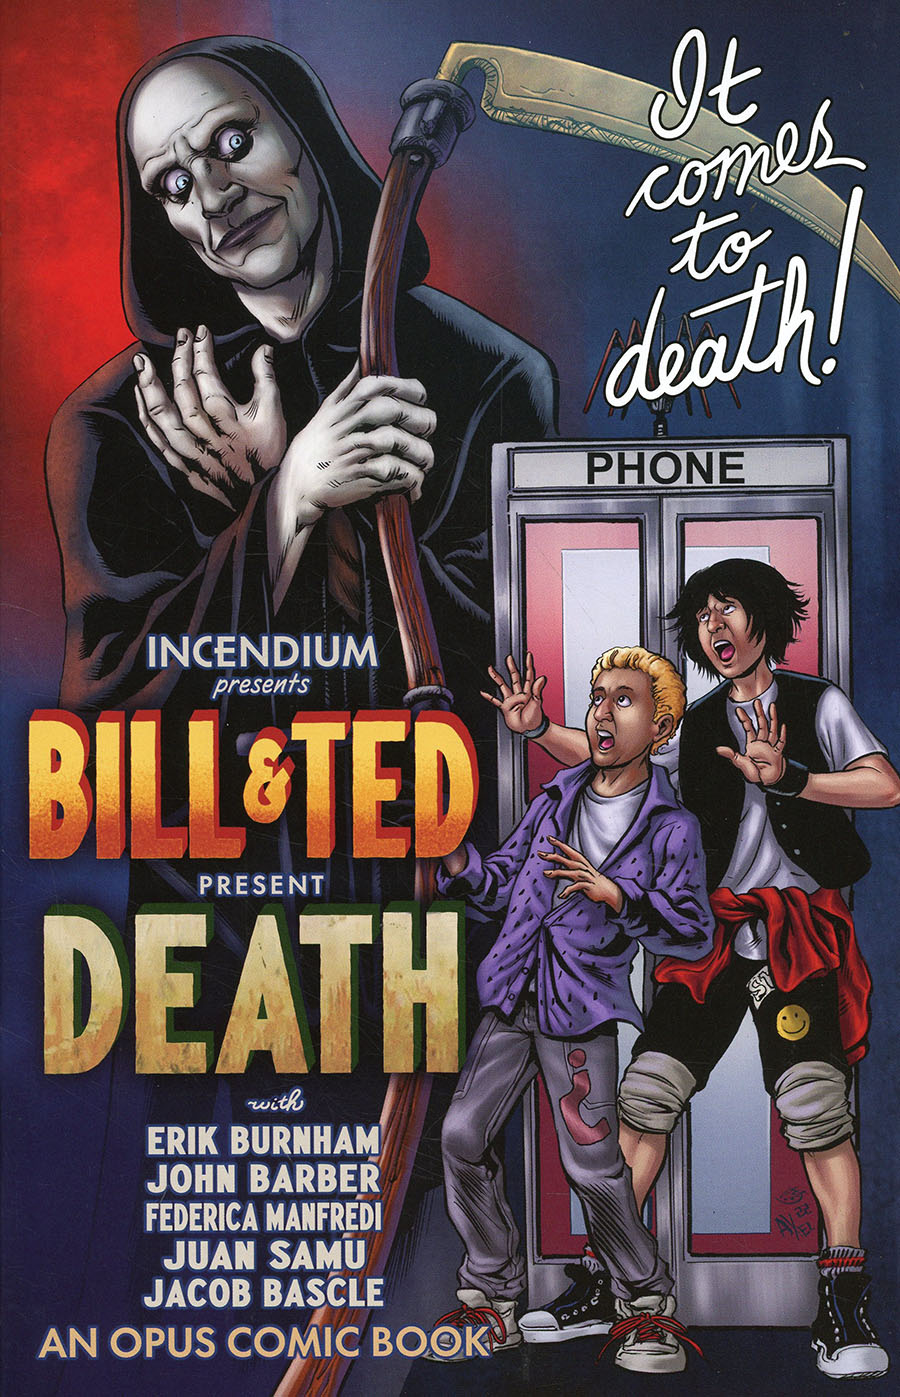 Bill & Ted Present Death #1 (One Shot) Cover B Incentive Axel Medellin & Oscar Carreno Monster Mash-Up Variant Cover